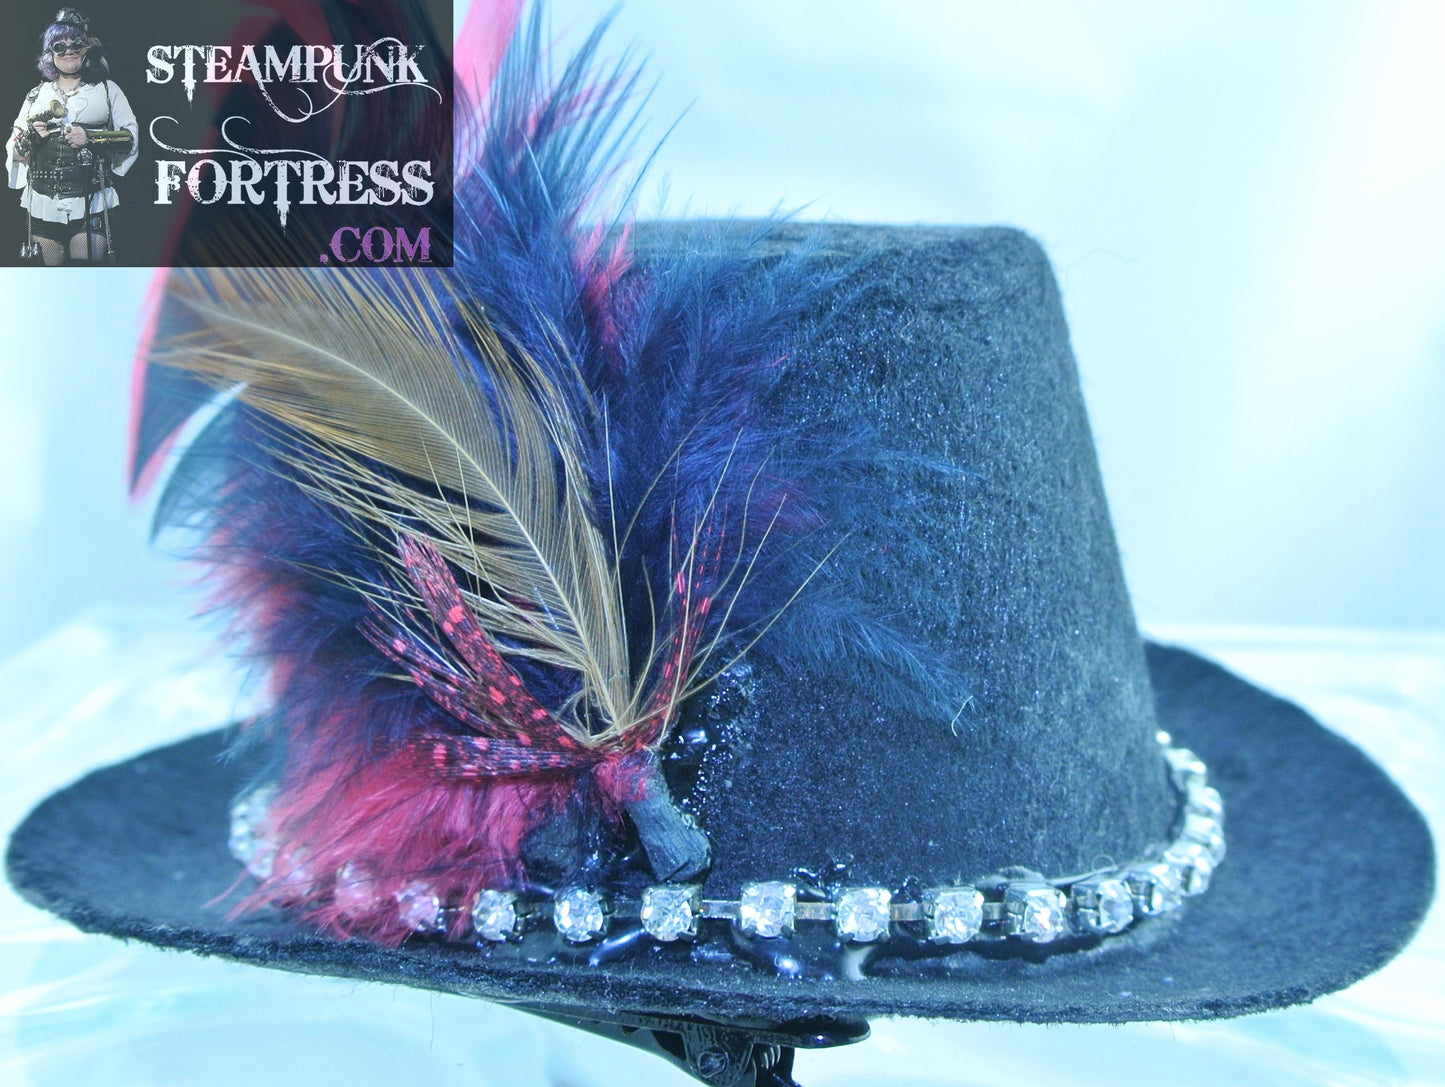 BLACK RED GOLD BLACK FEATHER SPRAY RHINESTONES CHAIN BAND XS EXTRA SMALL MINI TOP HAT STARR WILDE STEAMPUNK FORTRESS